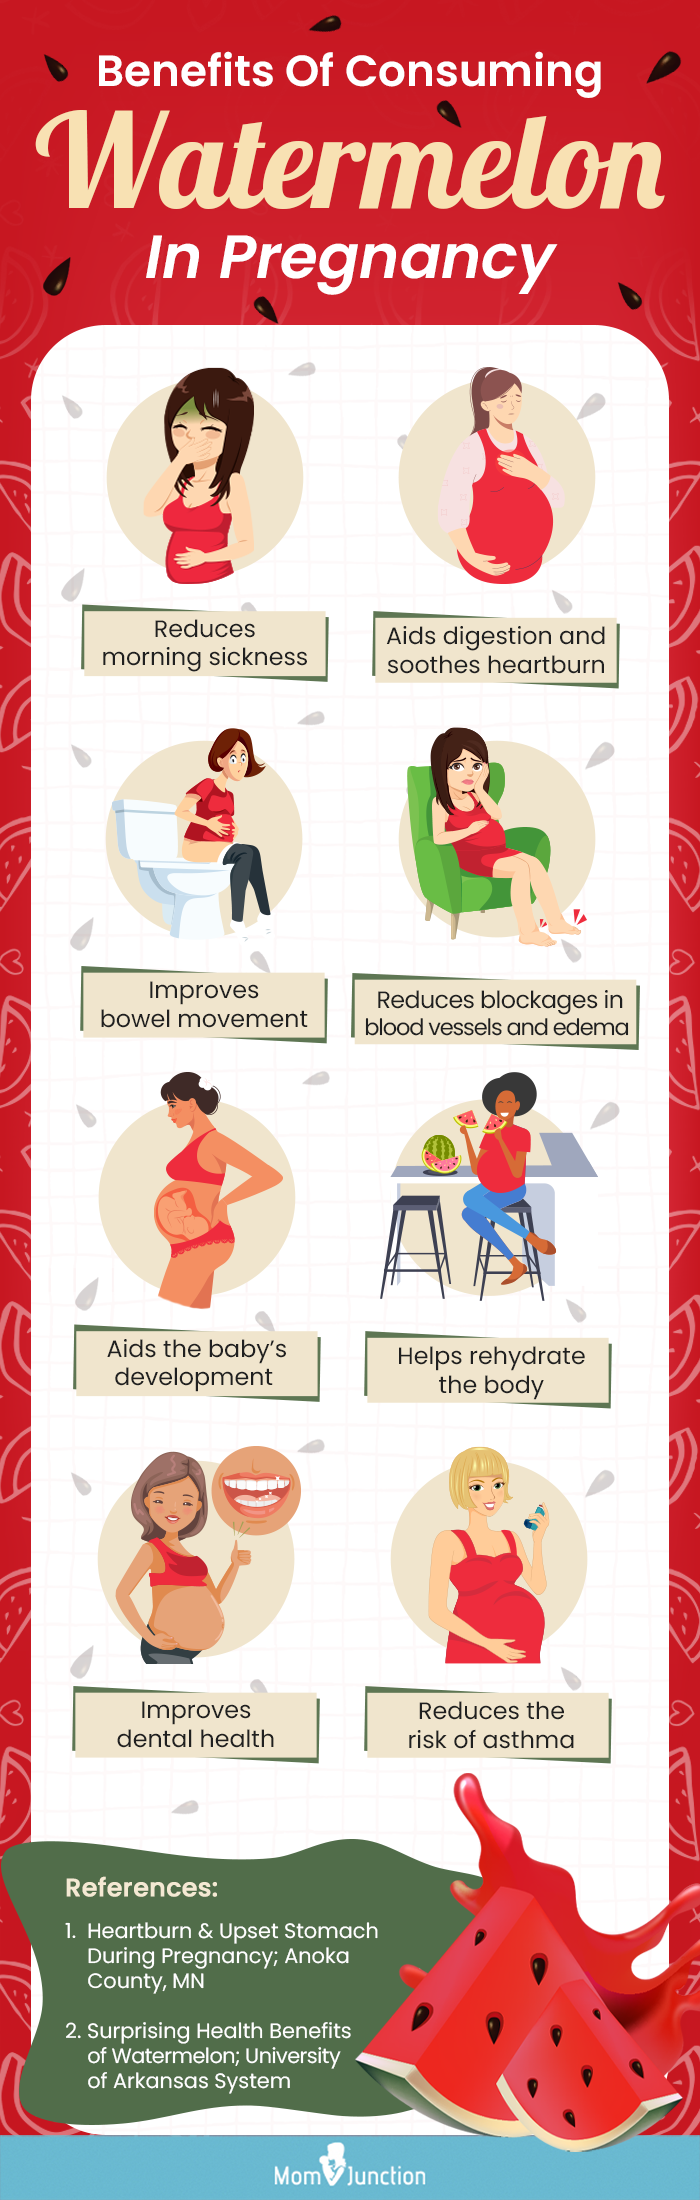 benefits of consuming watermelon in pregnancy (infographic)